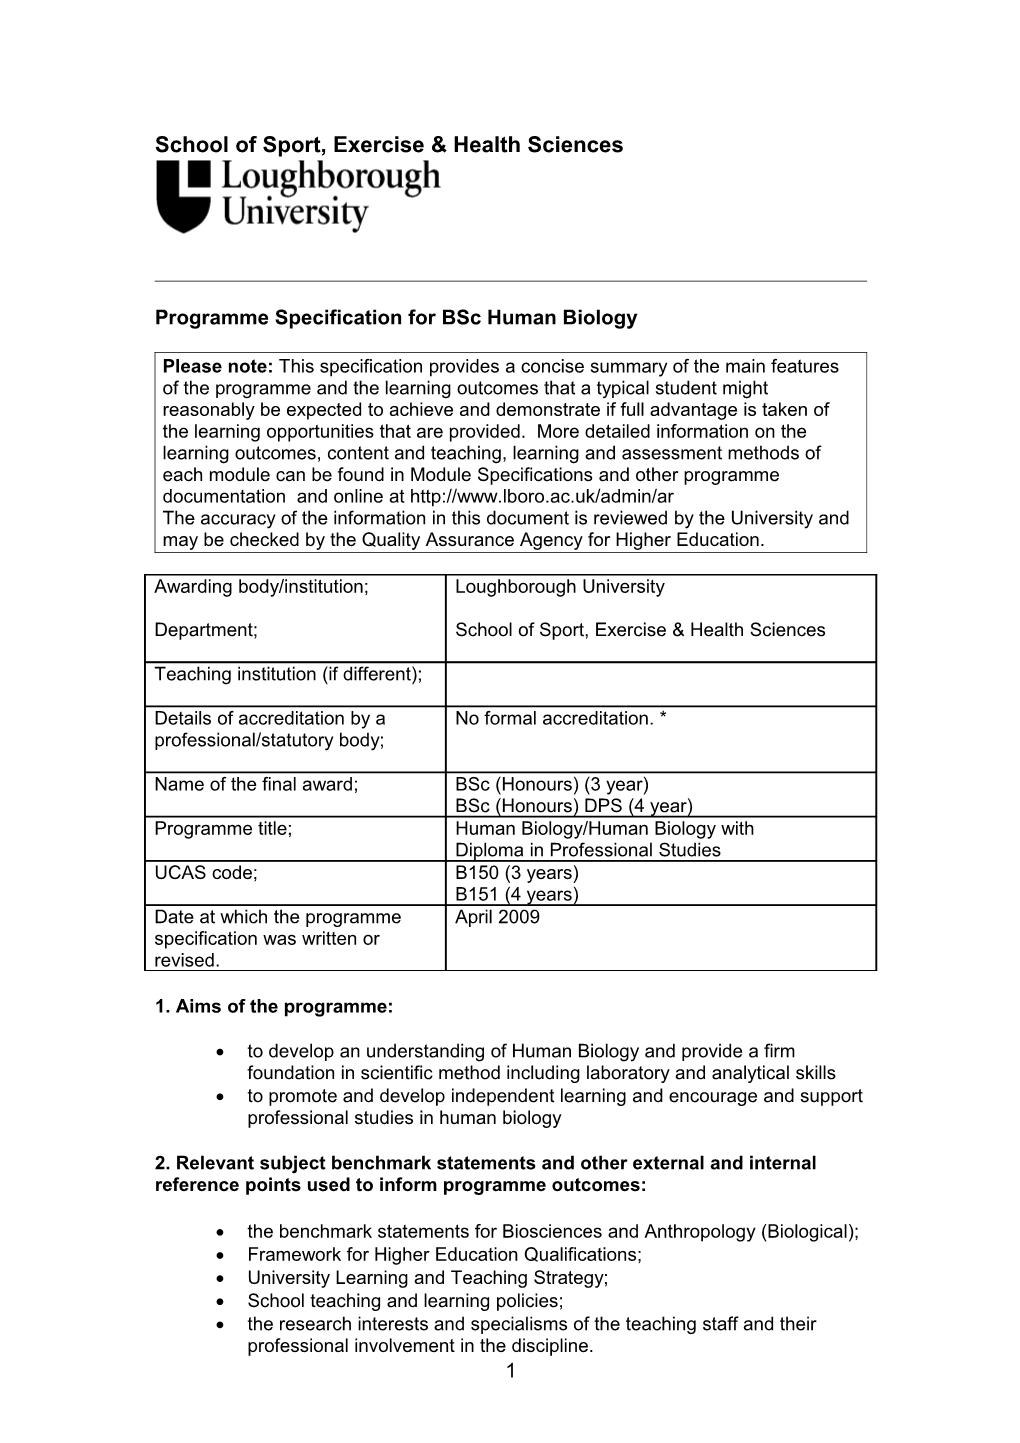 Programme Specification for Bsc Human Biology